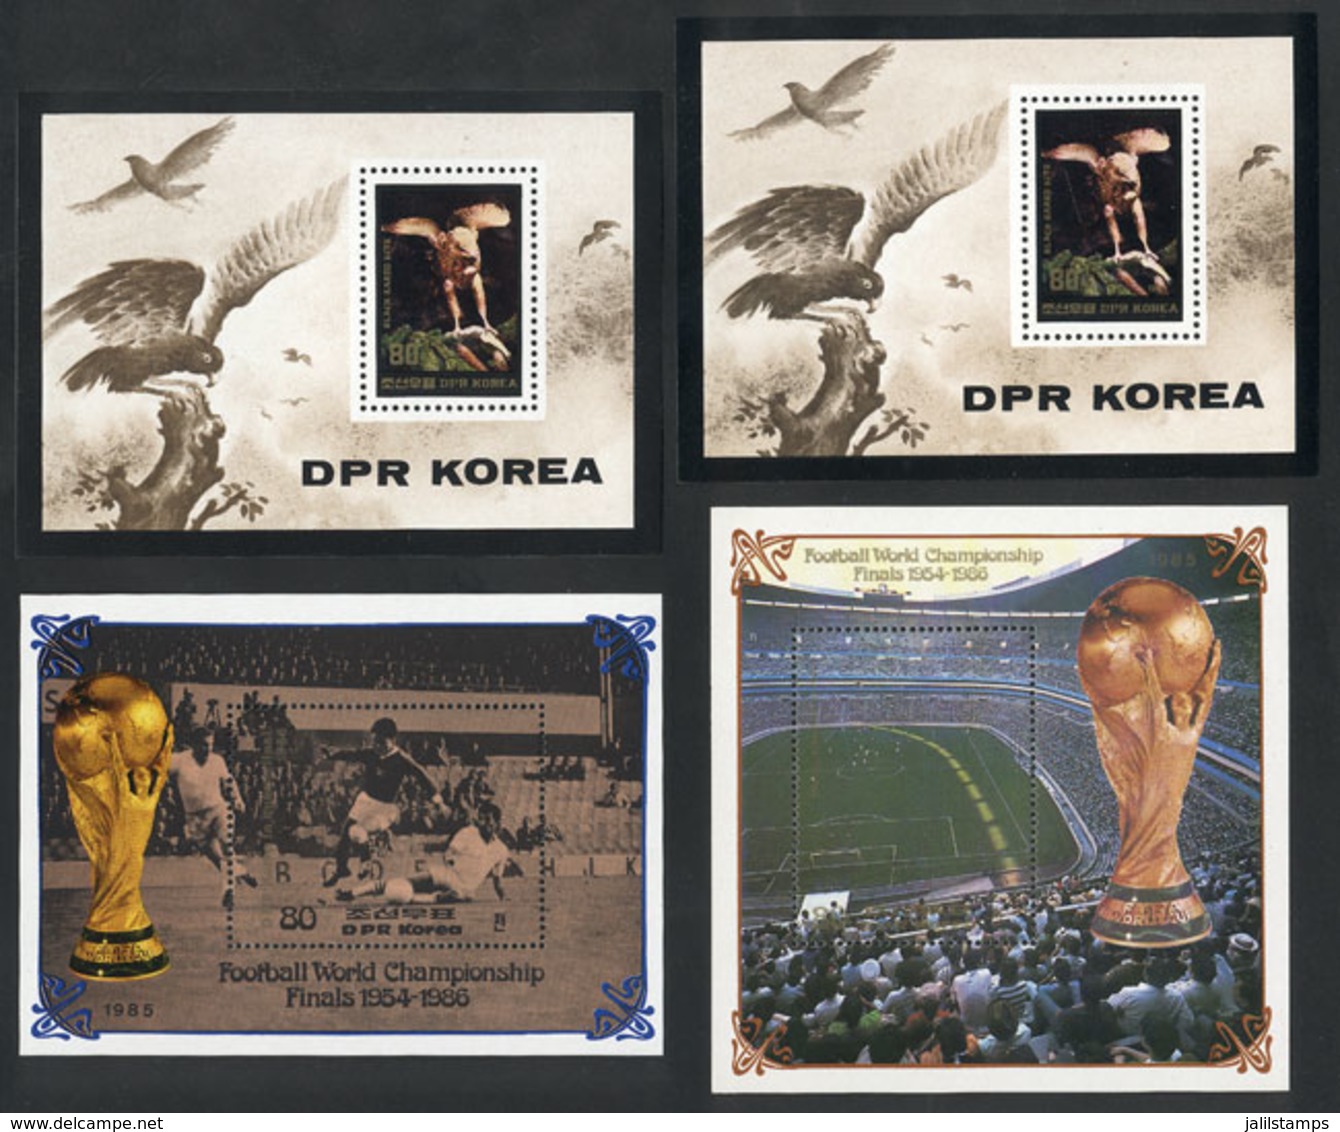 NORTH KOREA: 4 VERY THEMATIC Modern Souvenir Sheets, Unmounted, Excellent Quality! - Korea, North